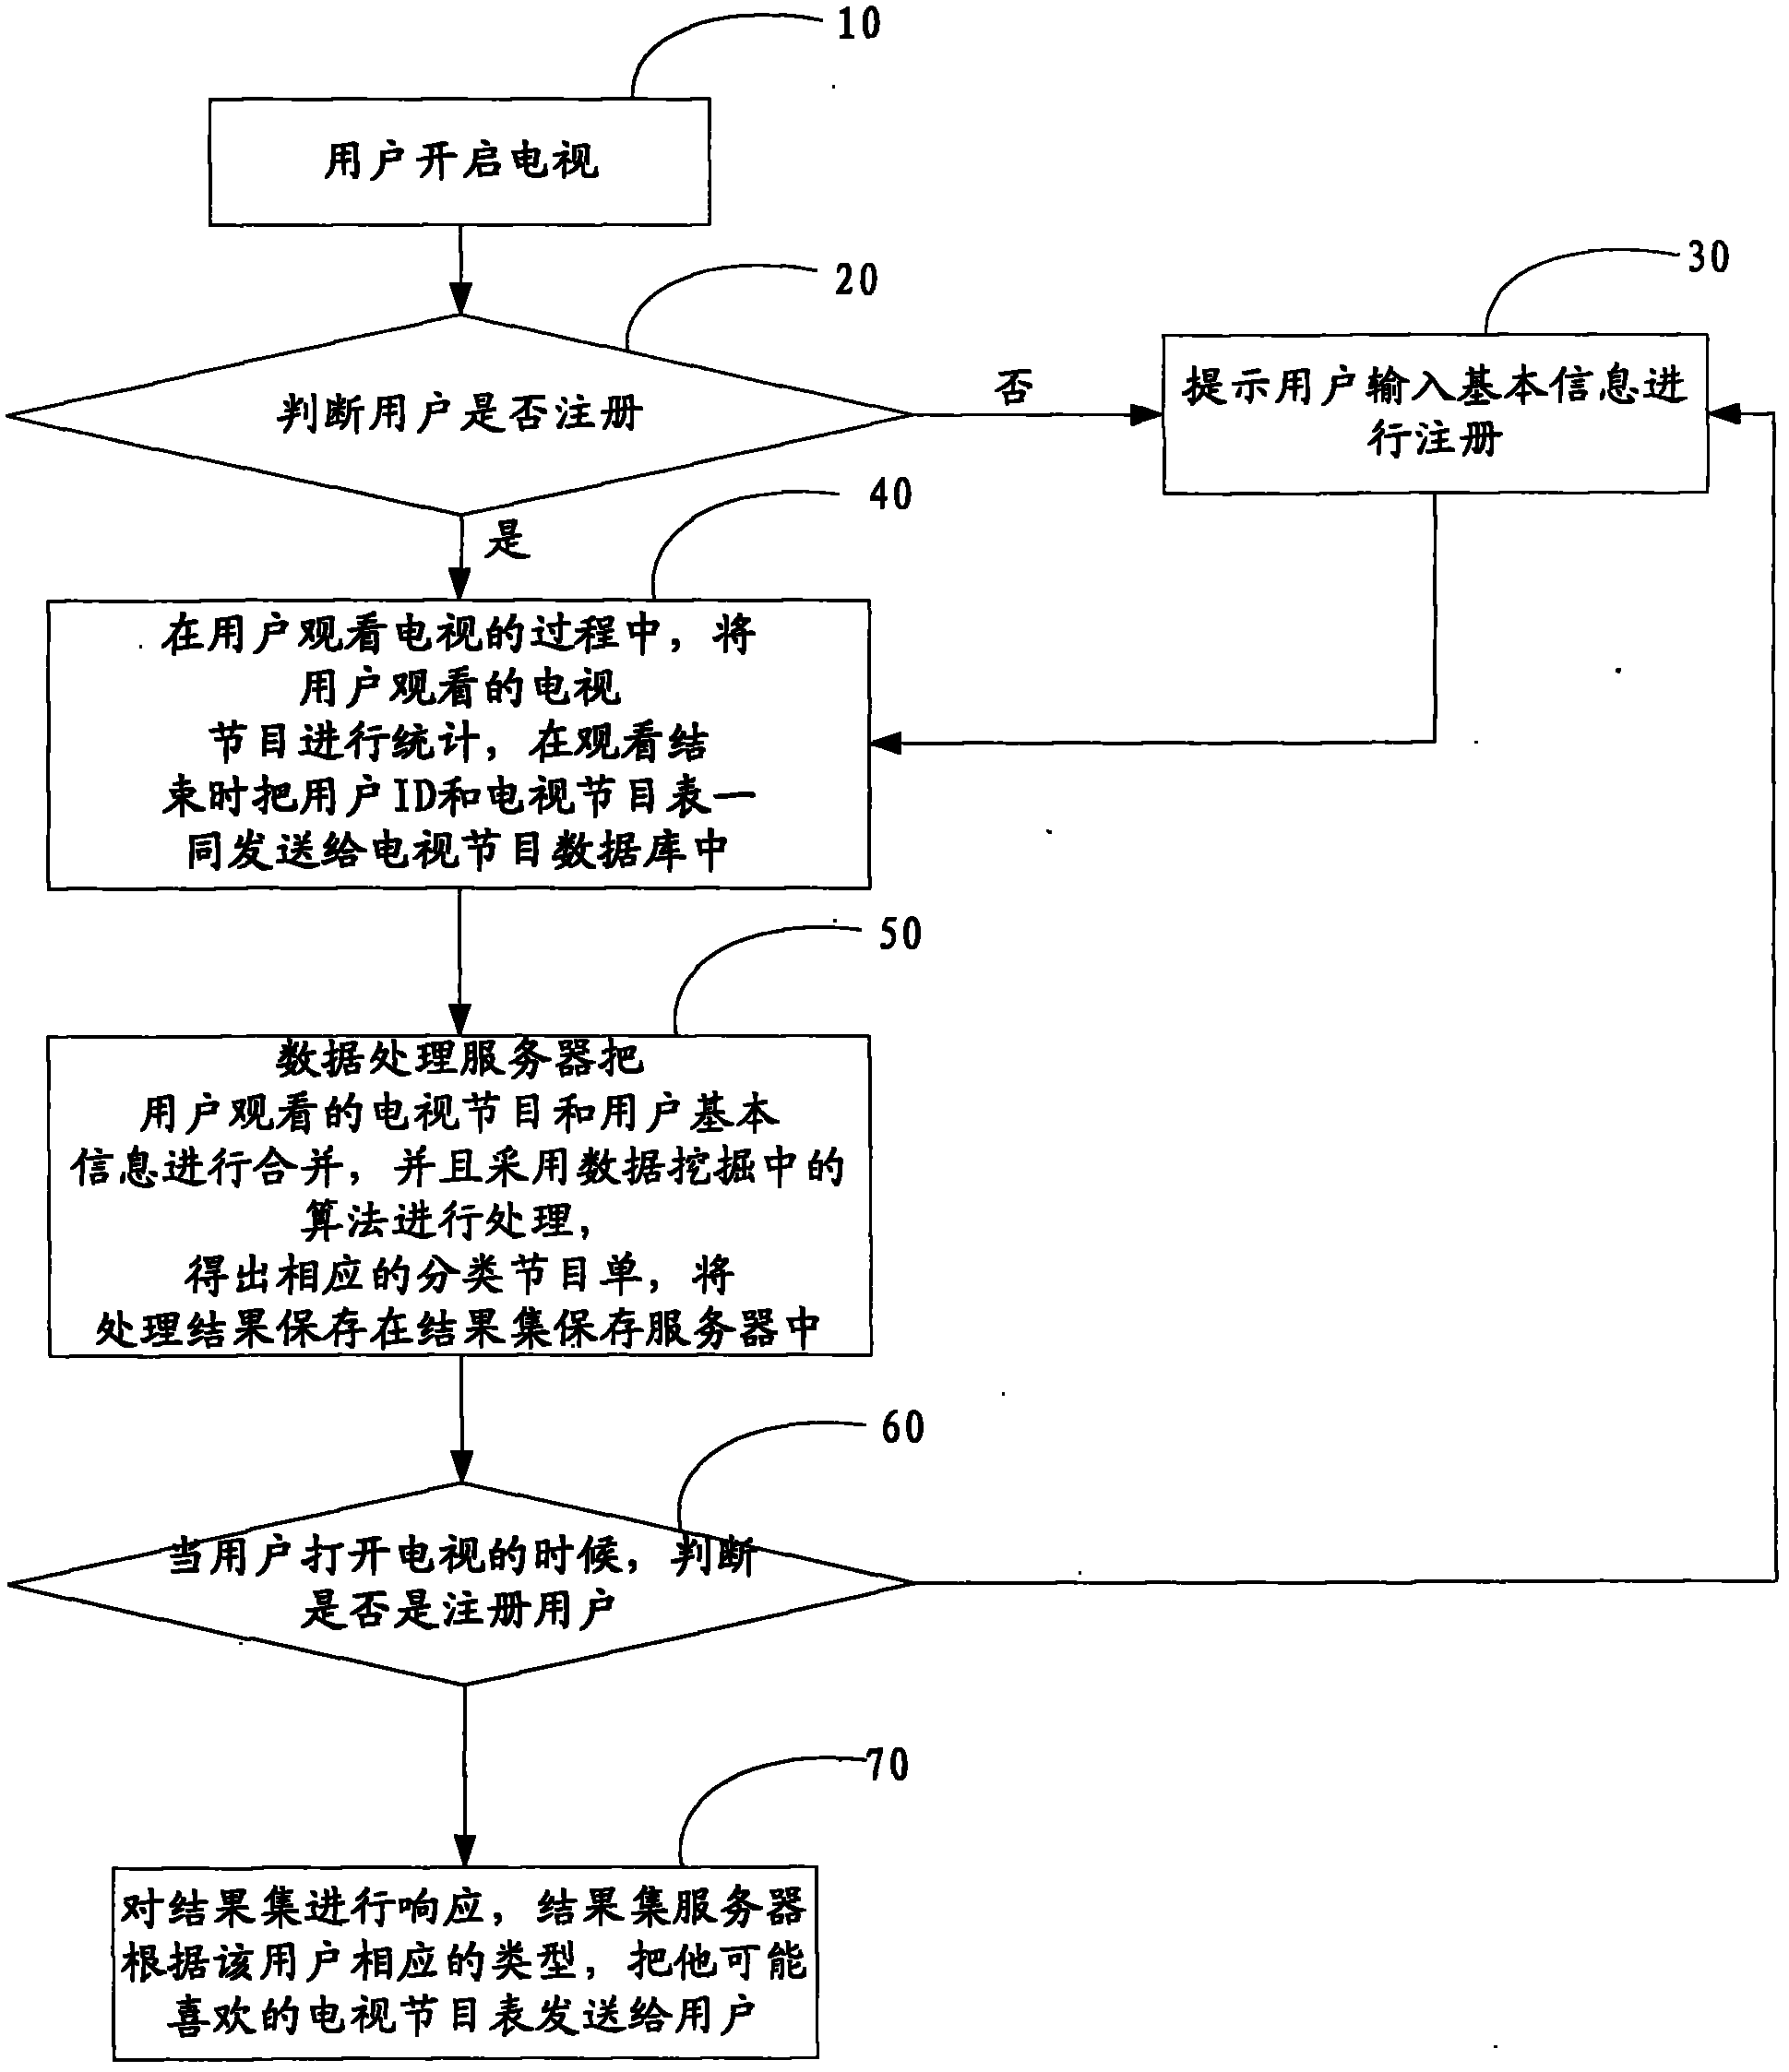 Method and system for providing TV guide and method for providing program-requesting information